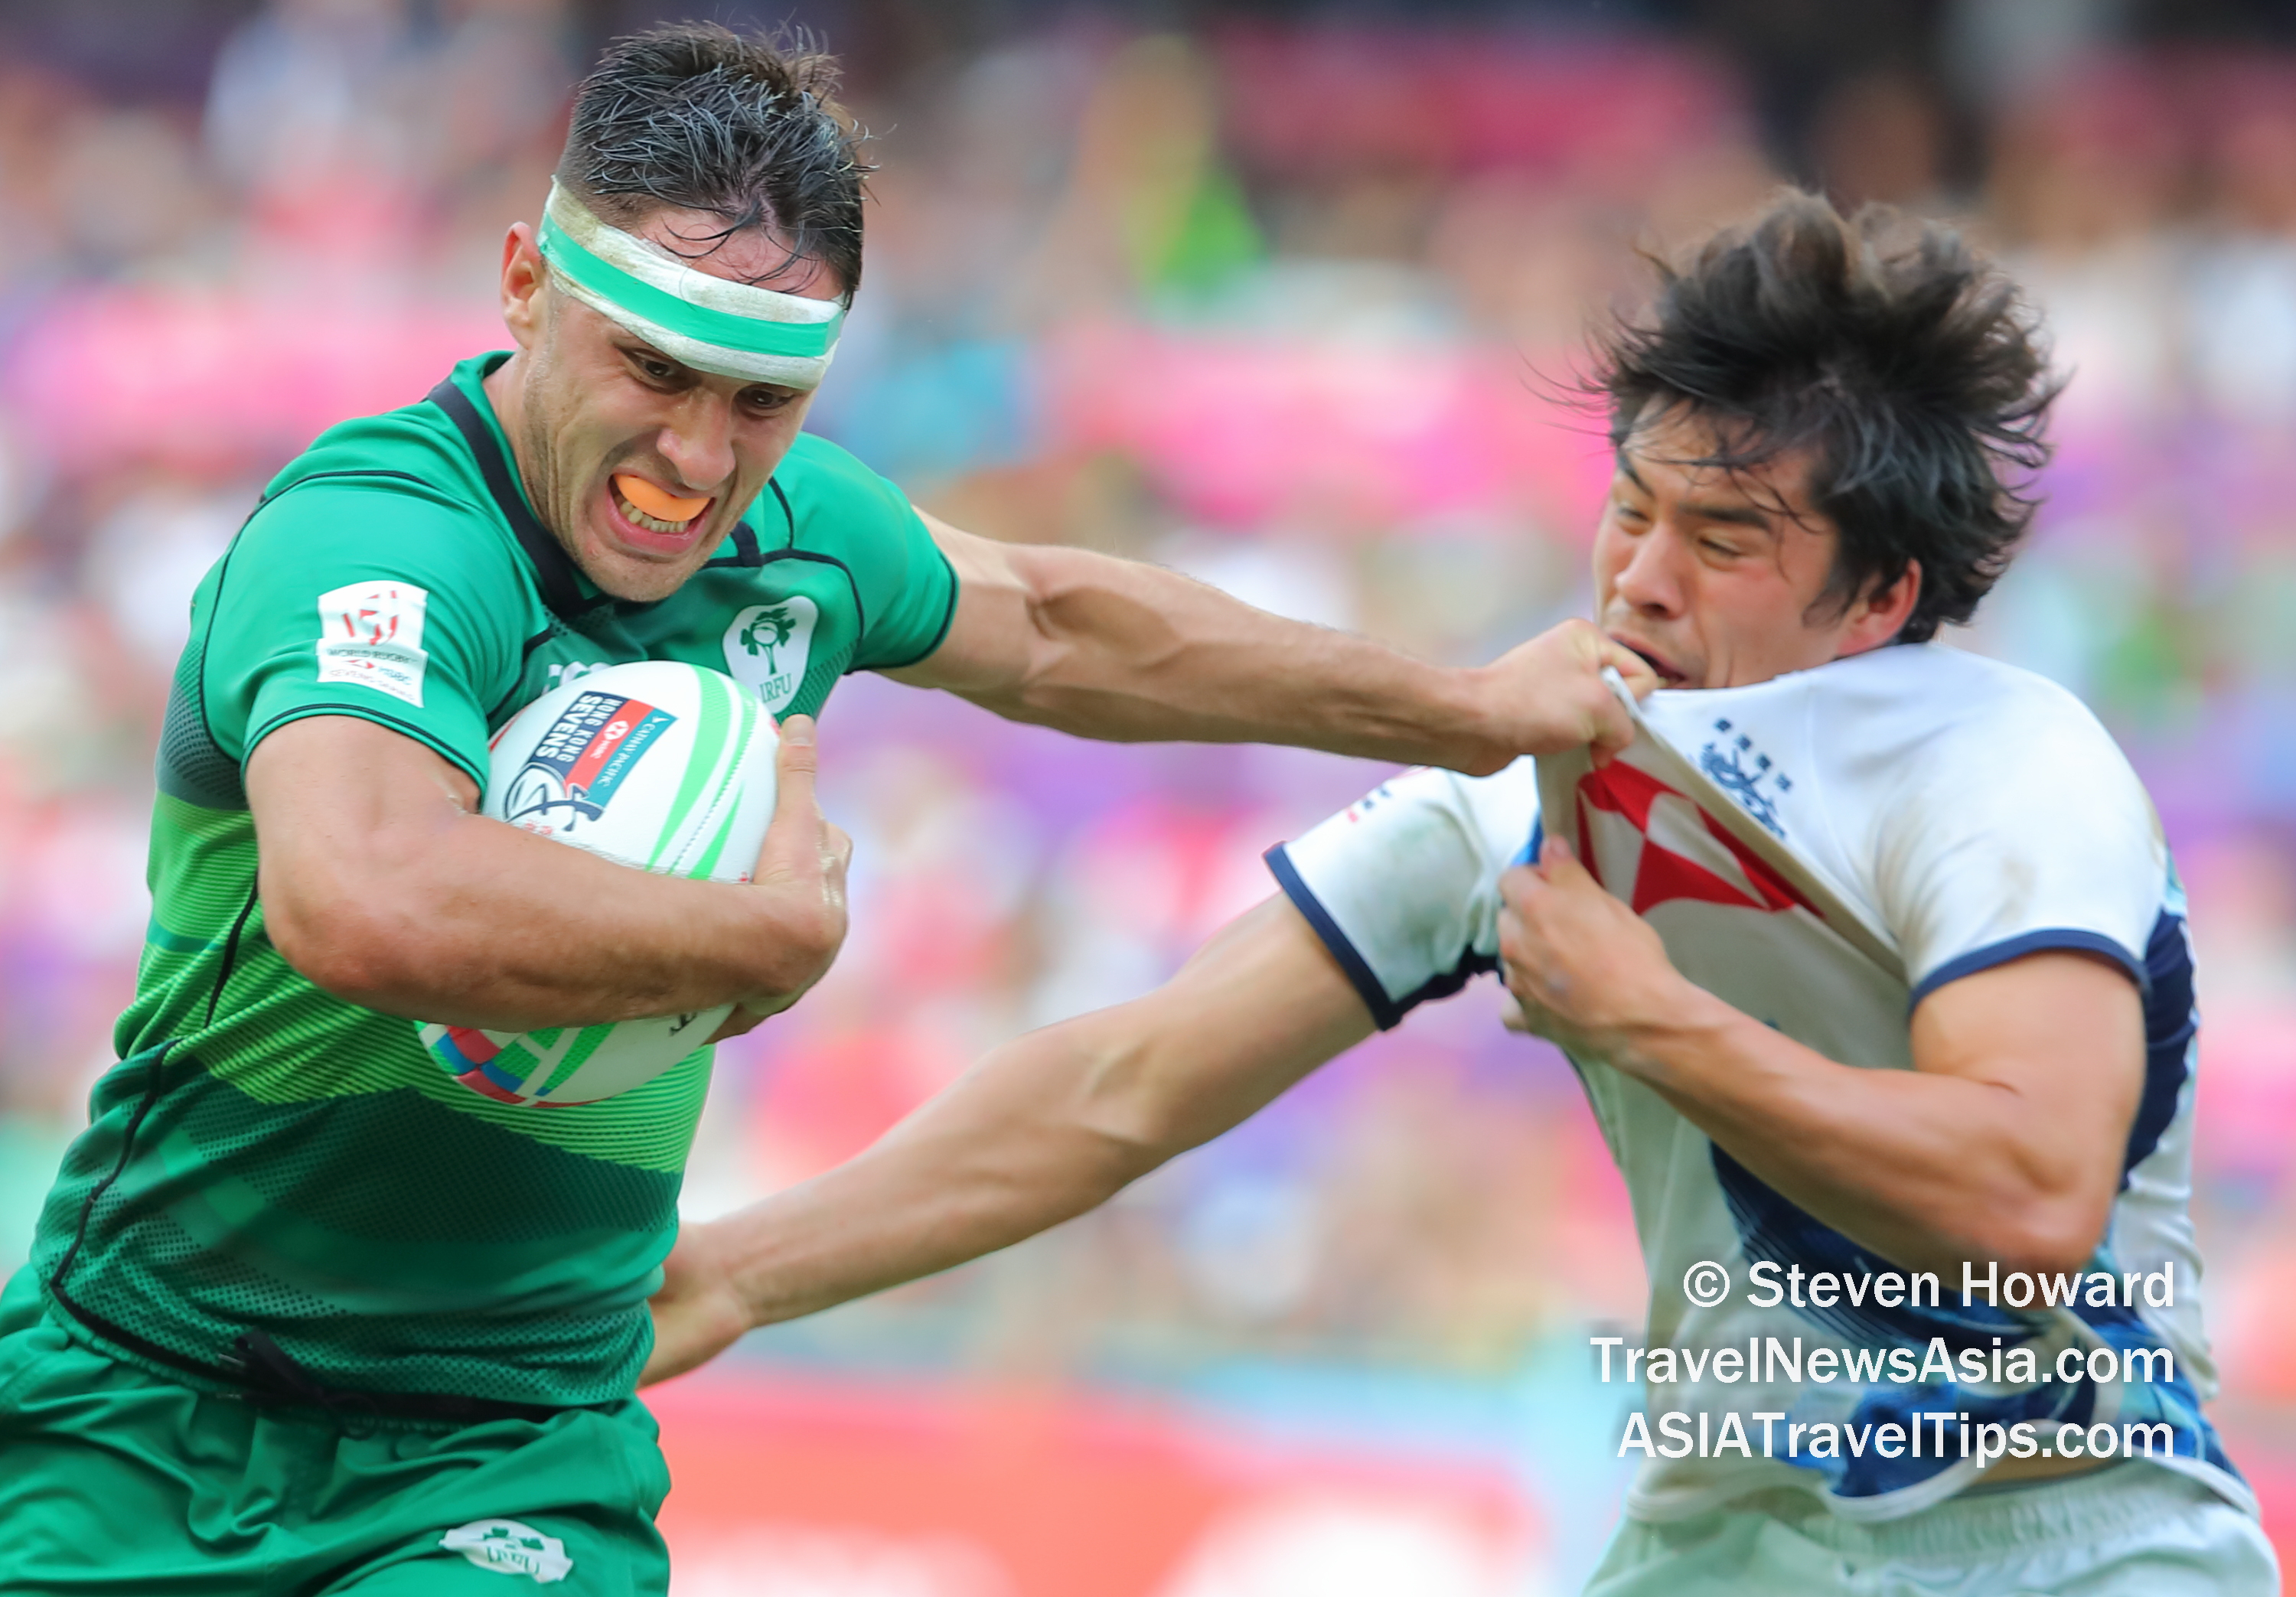 Action from the Cathay Pacific / HSBC Hong Kong Sevens 2019. The Hong Kong Sevens is widely regarded as the greatest 7s spectacle on earth. Picture by Steven Howard of TravelNewsAsia.com Click to enlarge.